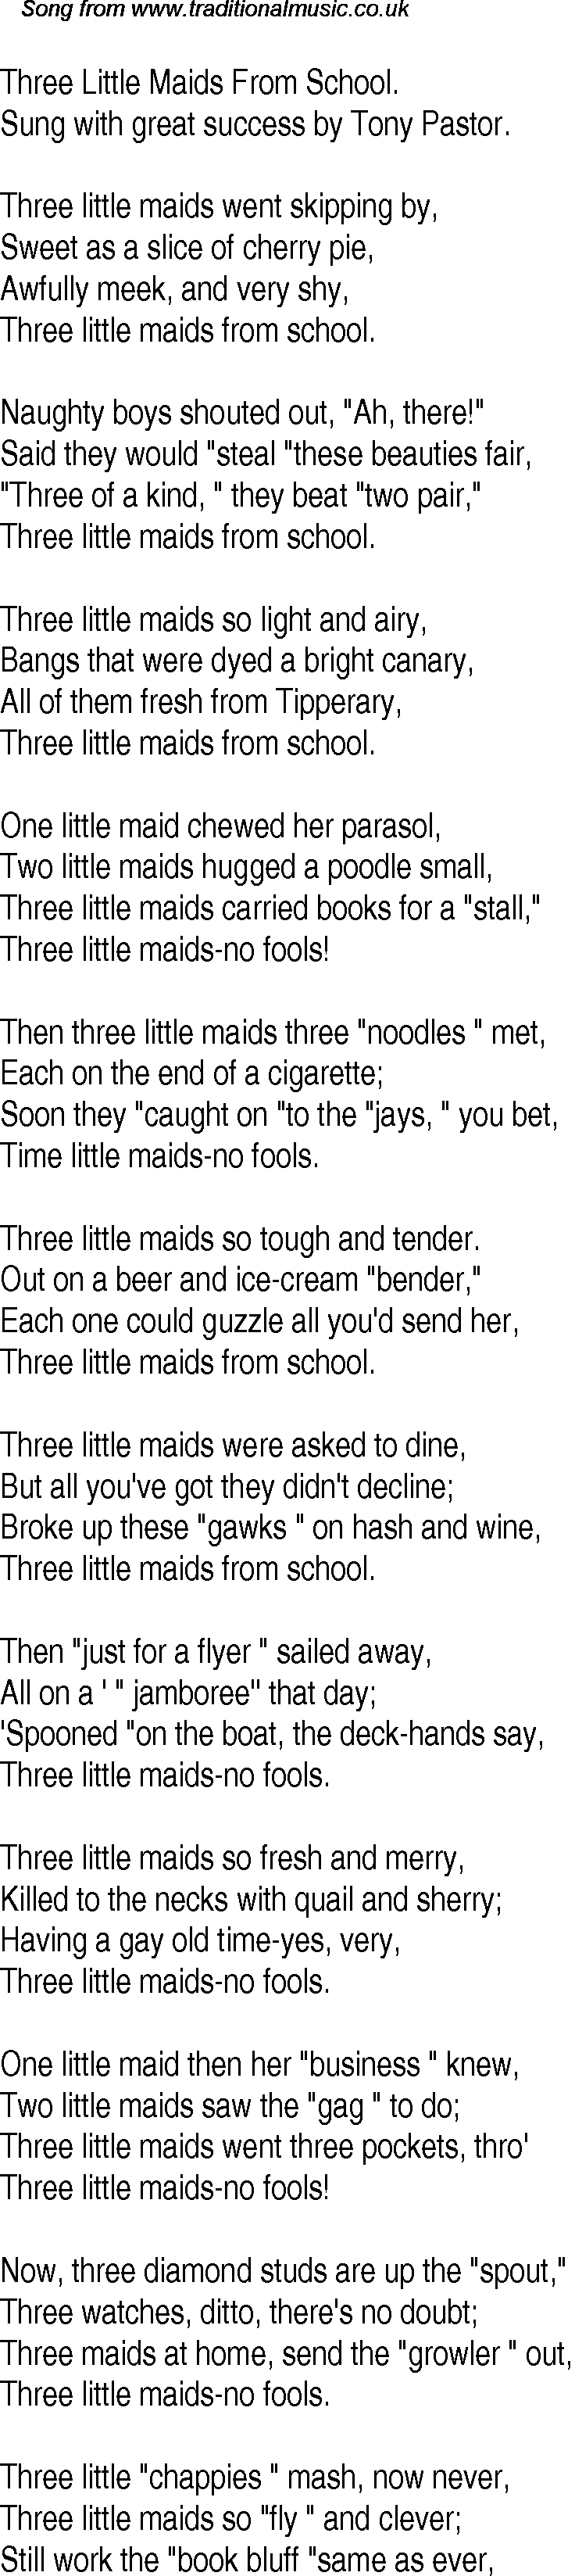 Old Time Song Lyrics for 18 Three Little Maids From School